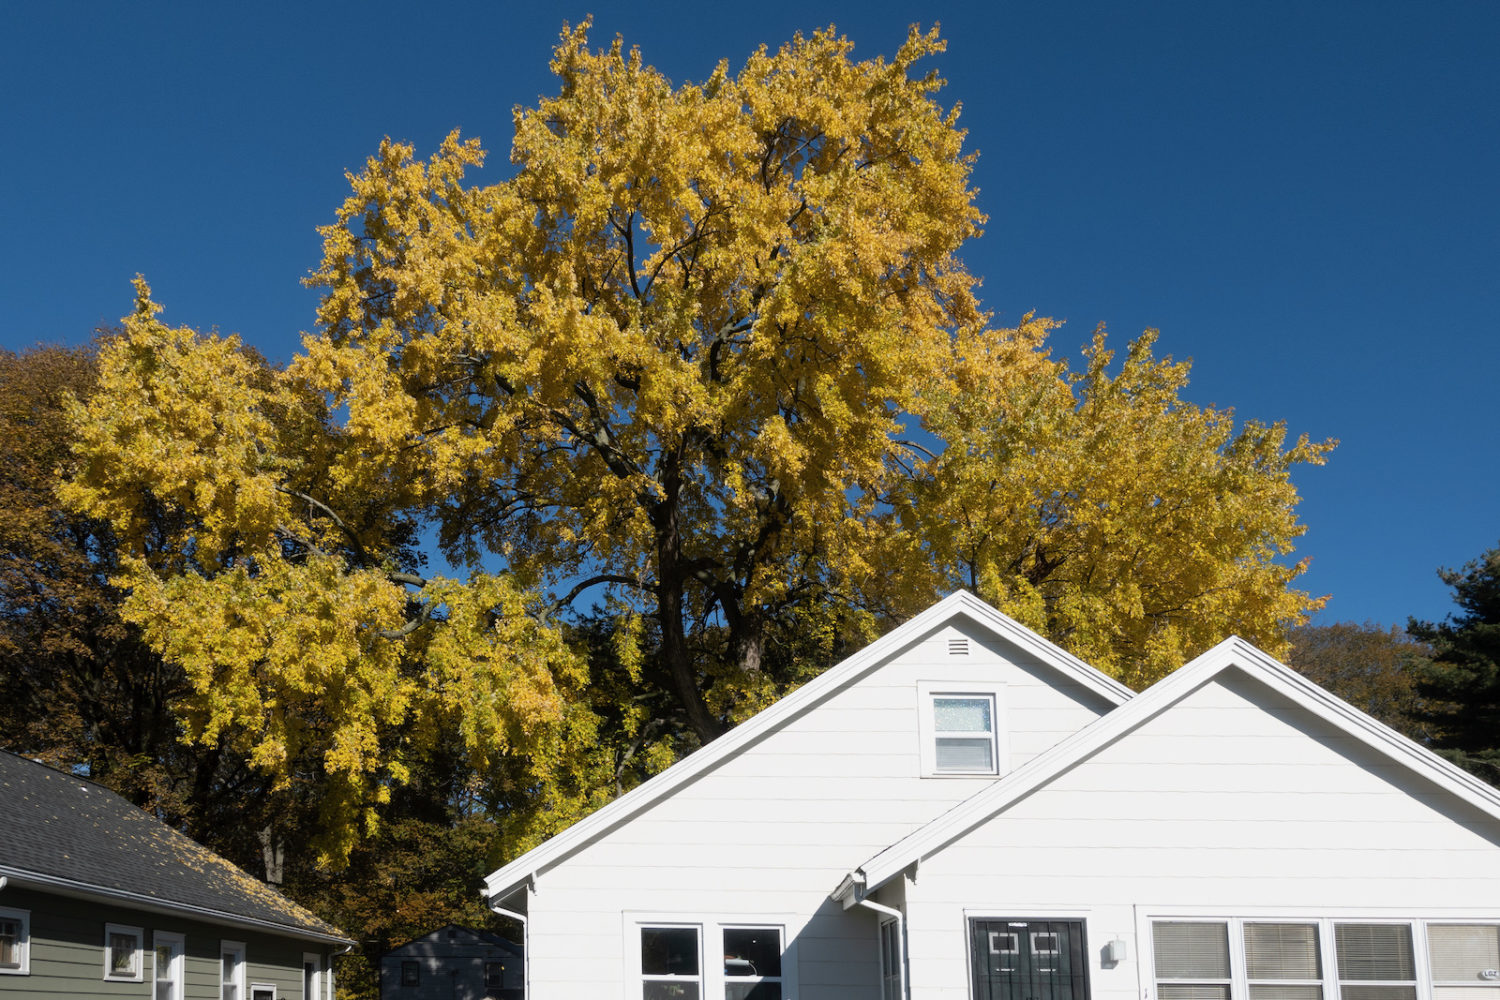 Blue skies, yellow tree and white house on Dewberry Street